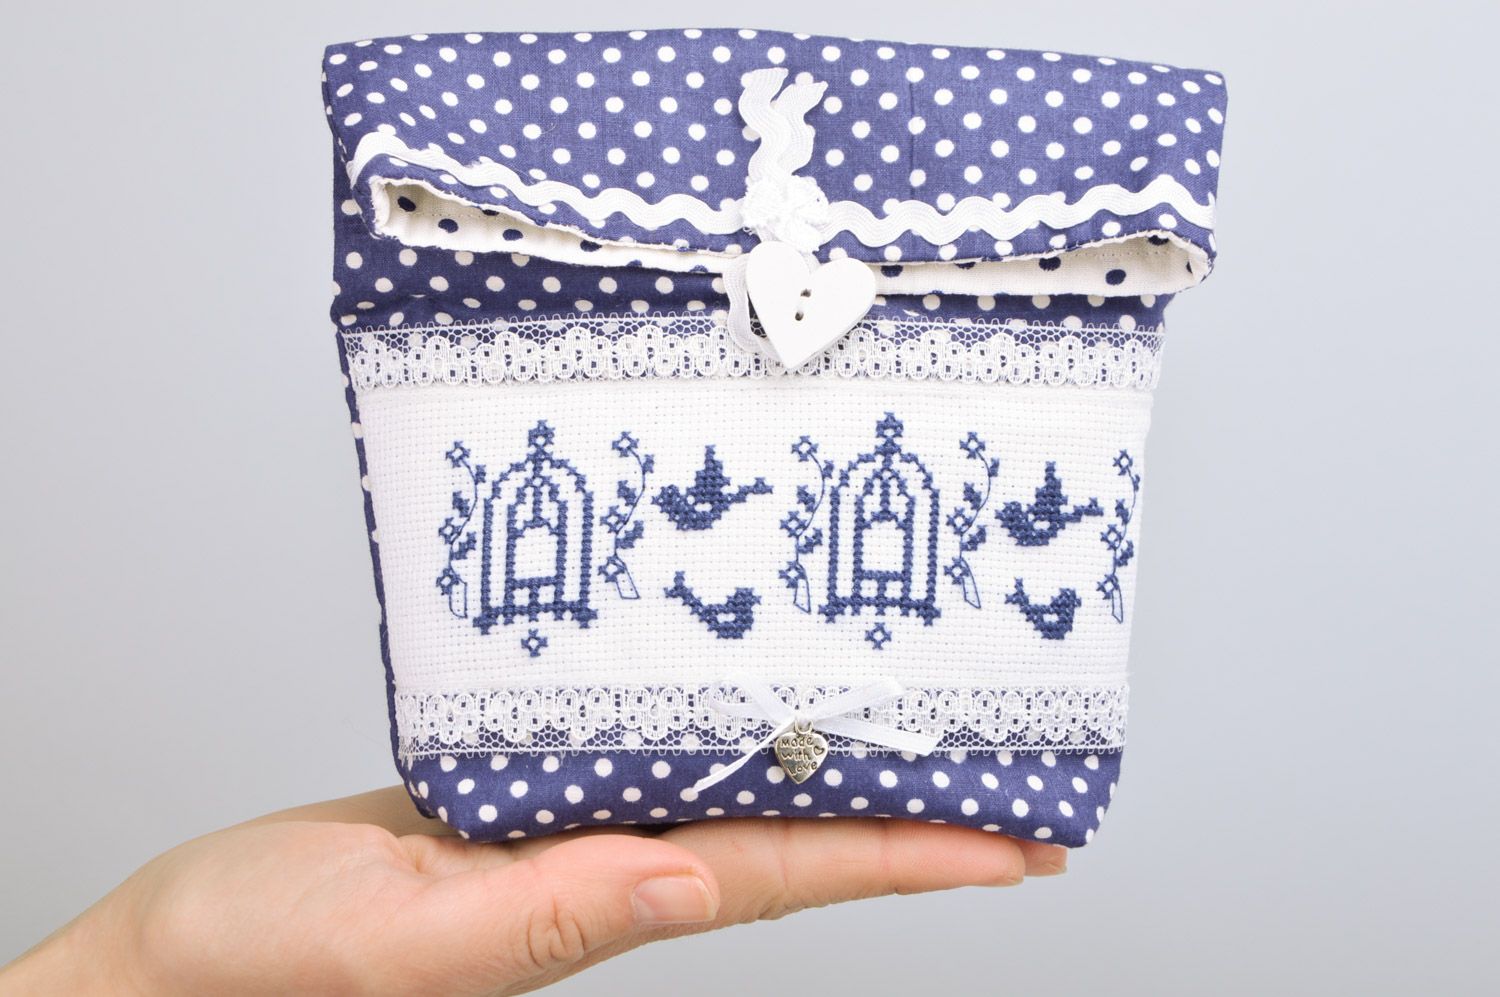 Cute handmade cosmetics bag sewn of blue polka dot cotton fabric with embroidery photo 3